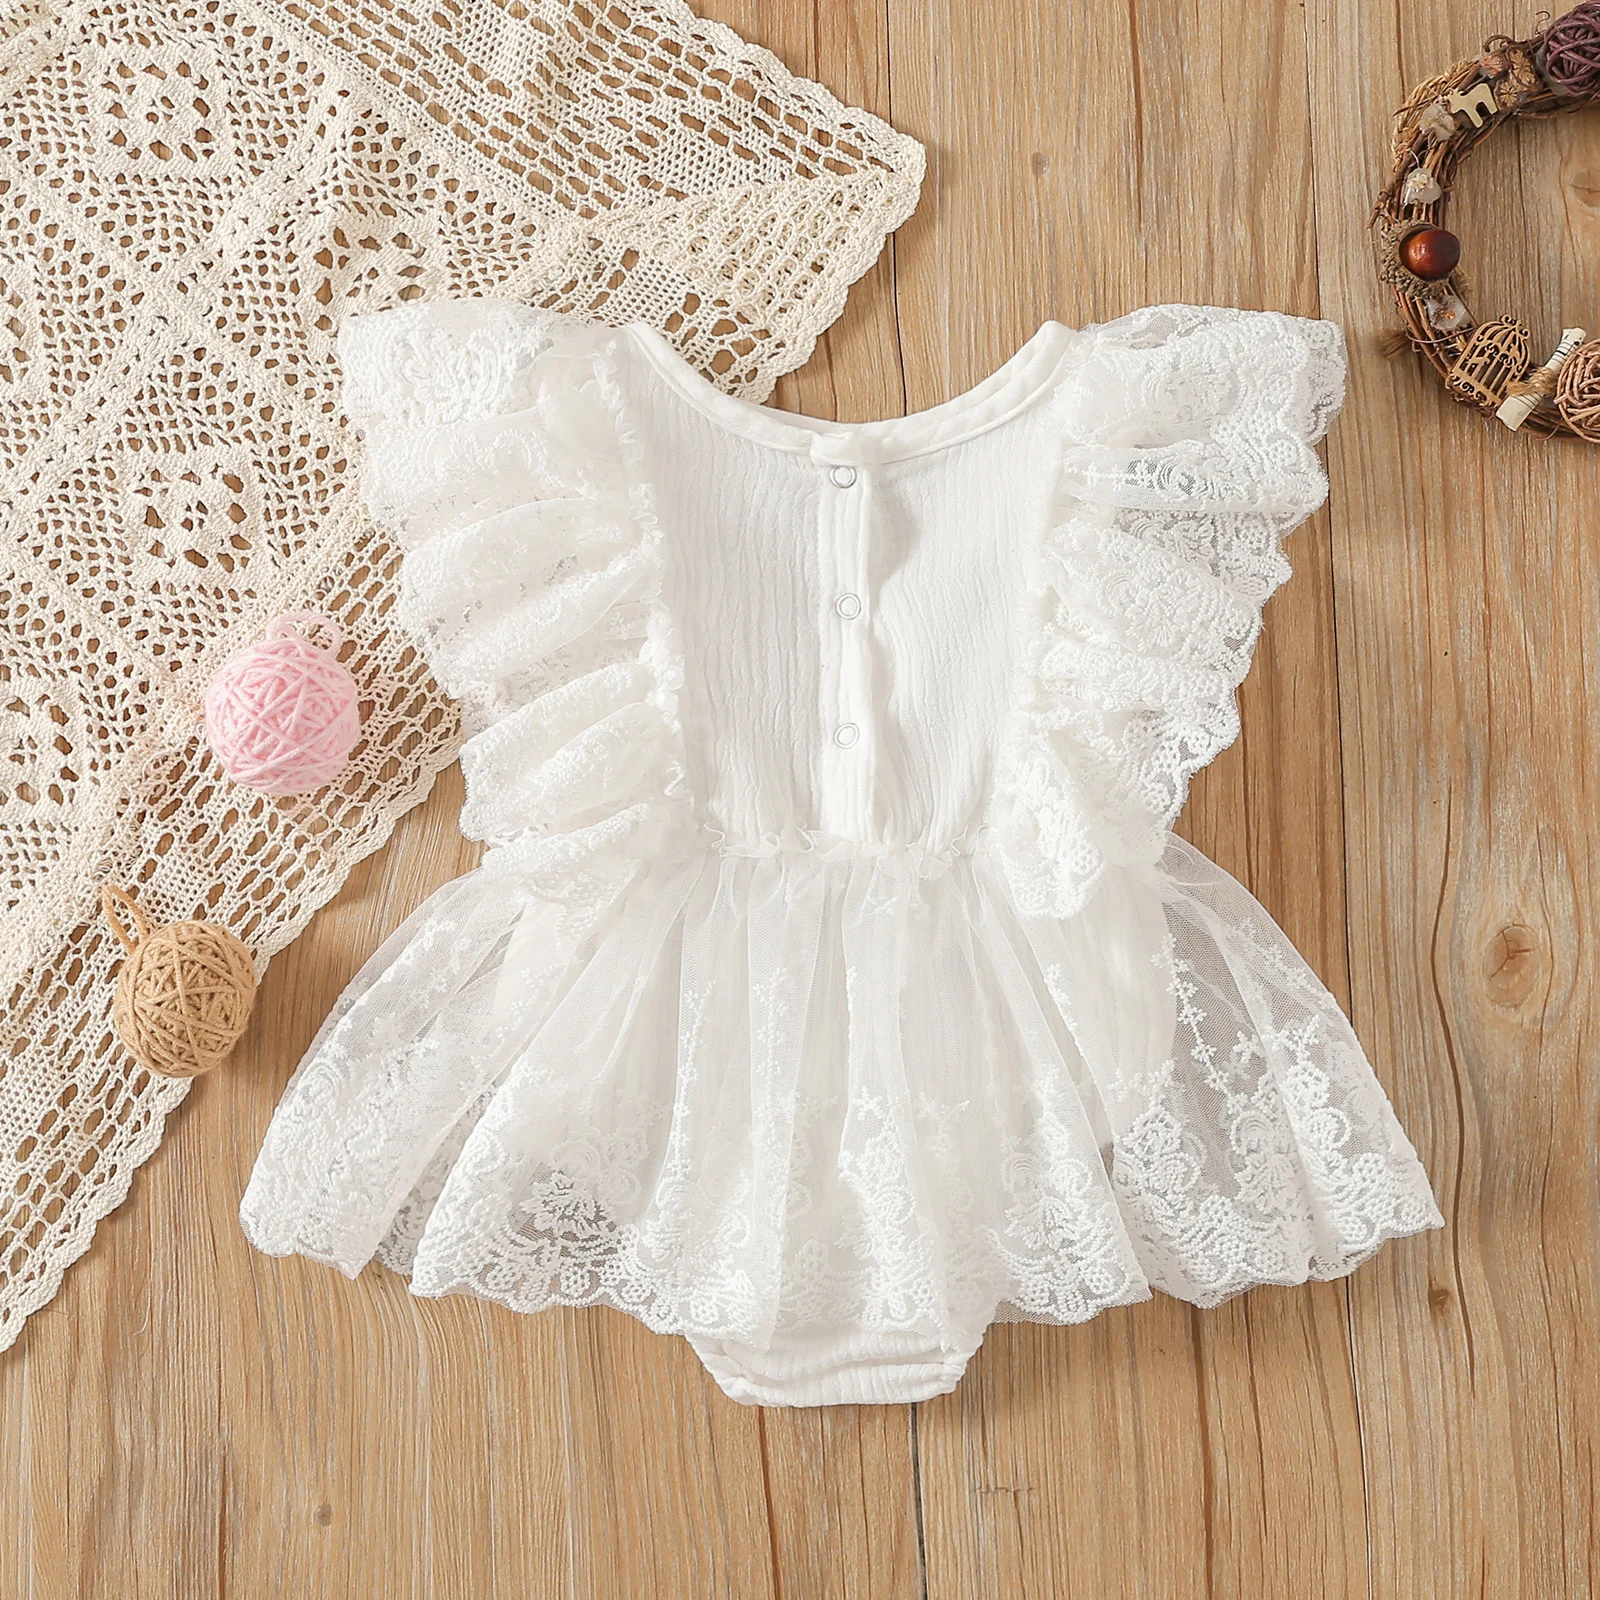 Cotton baby suit ma&baby 0-18M Summer Newborn Infant Baby Girl Romper Lace Ruffle Jumpsuit Princess Girls Birthday Party Costumes D01 Baby Bodysuits are cool